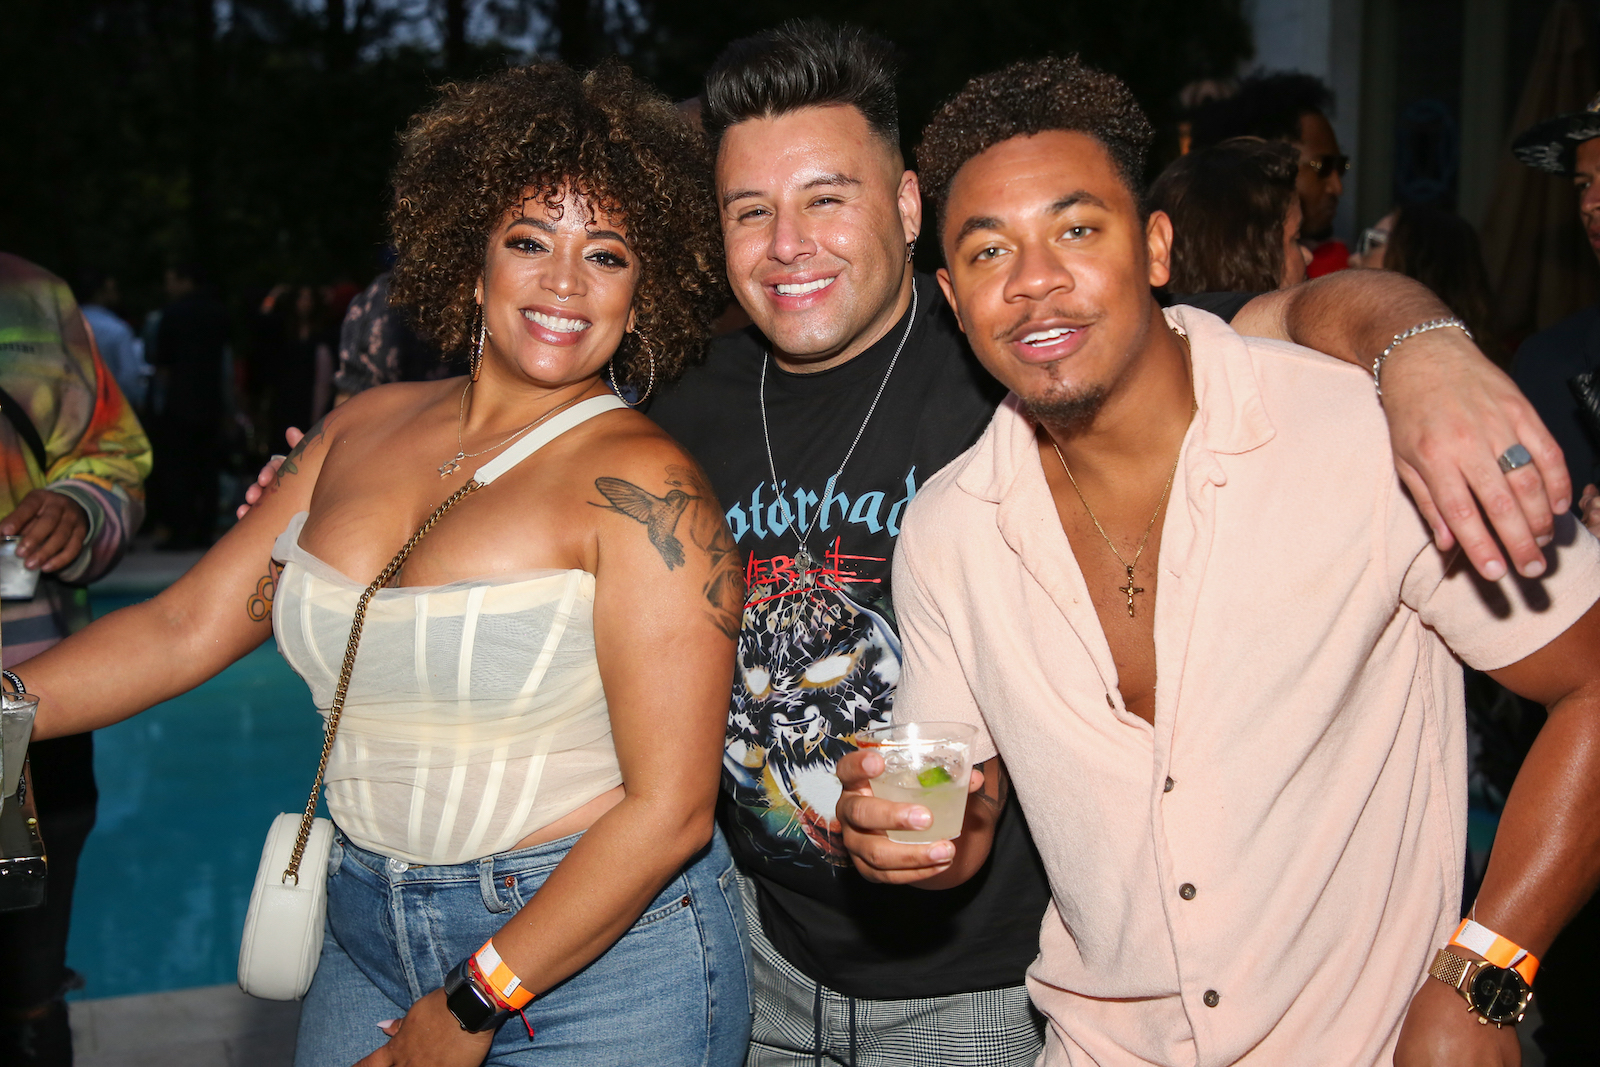 Aneesa Ferreira from MTV's 'The Challenge' Season 38 cast, Johnny Donovan, and Cameron Armstrong smiling while at an event